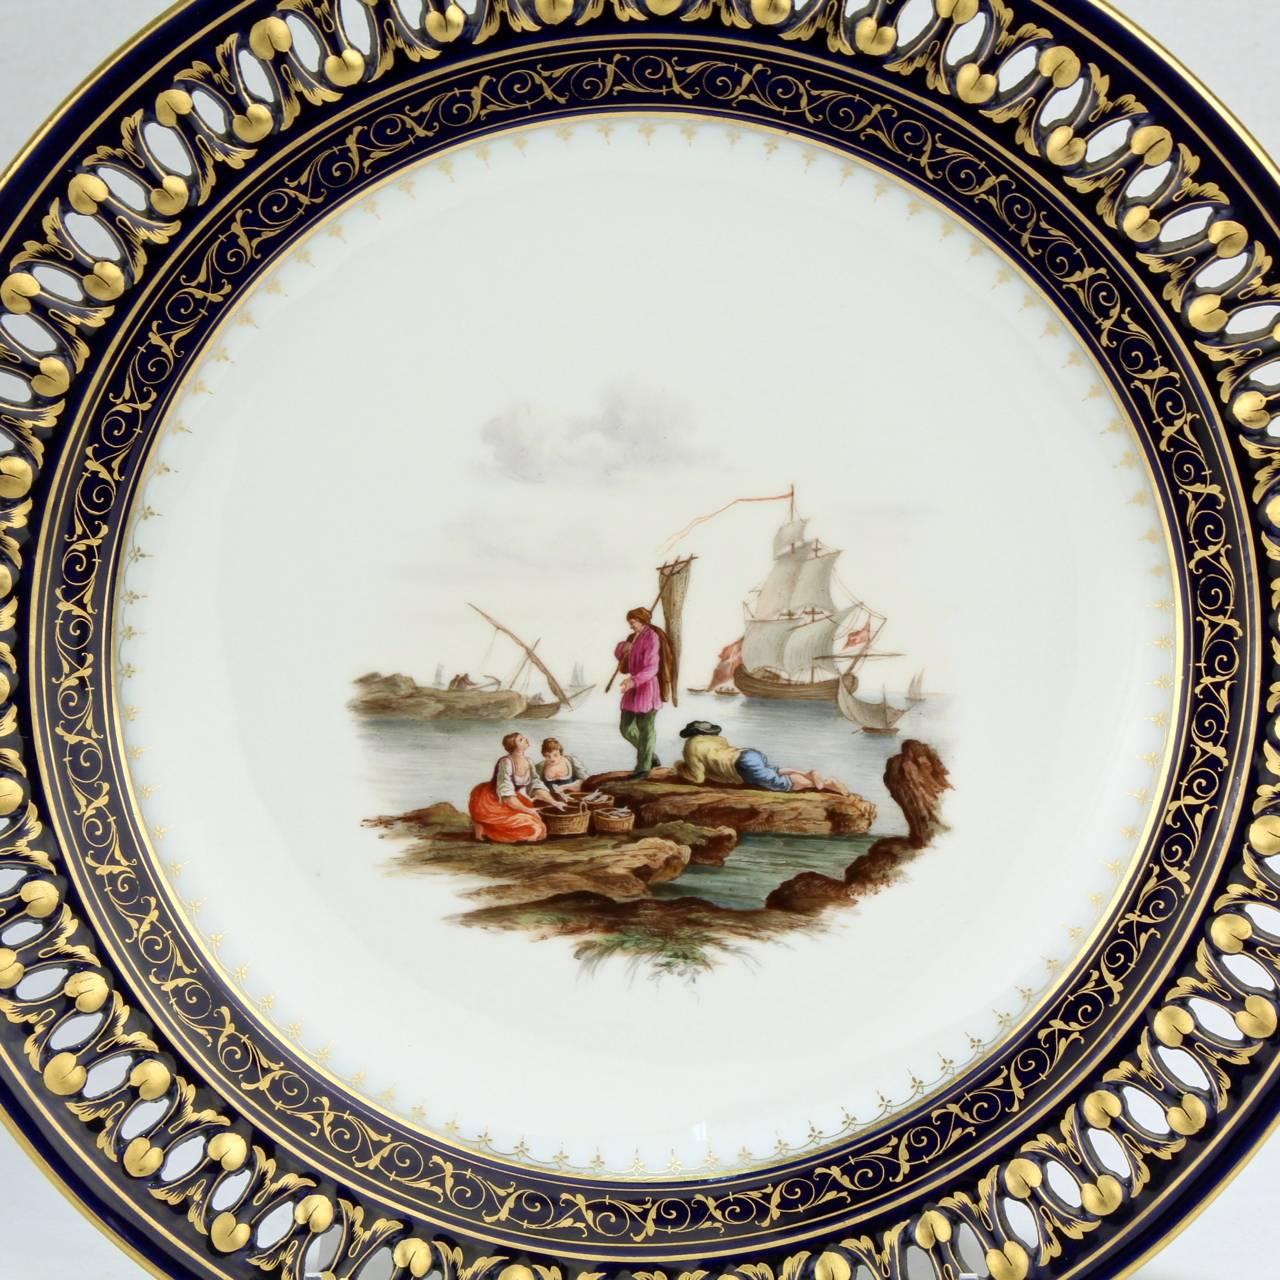 Hand-Painted Pair of Antique Meissen Porcelain Reticulated Cabinet Plates with Cobalt Borders